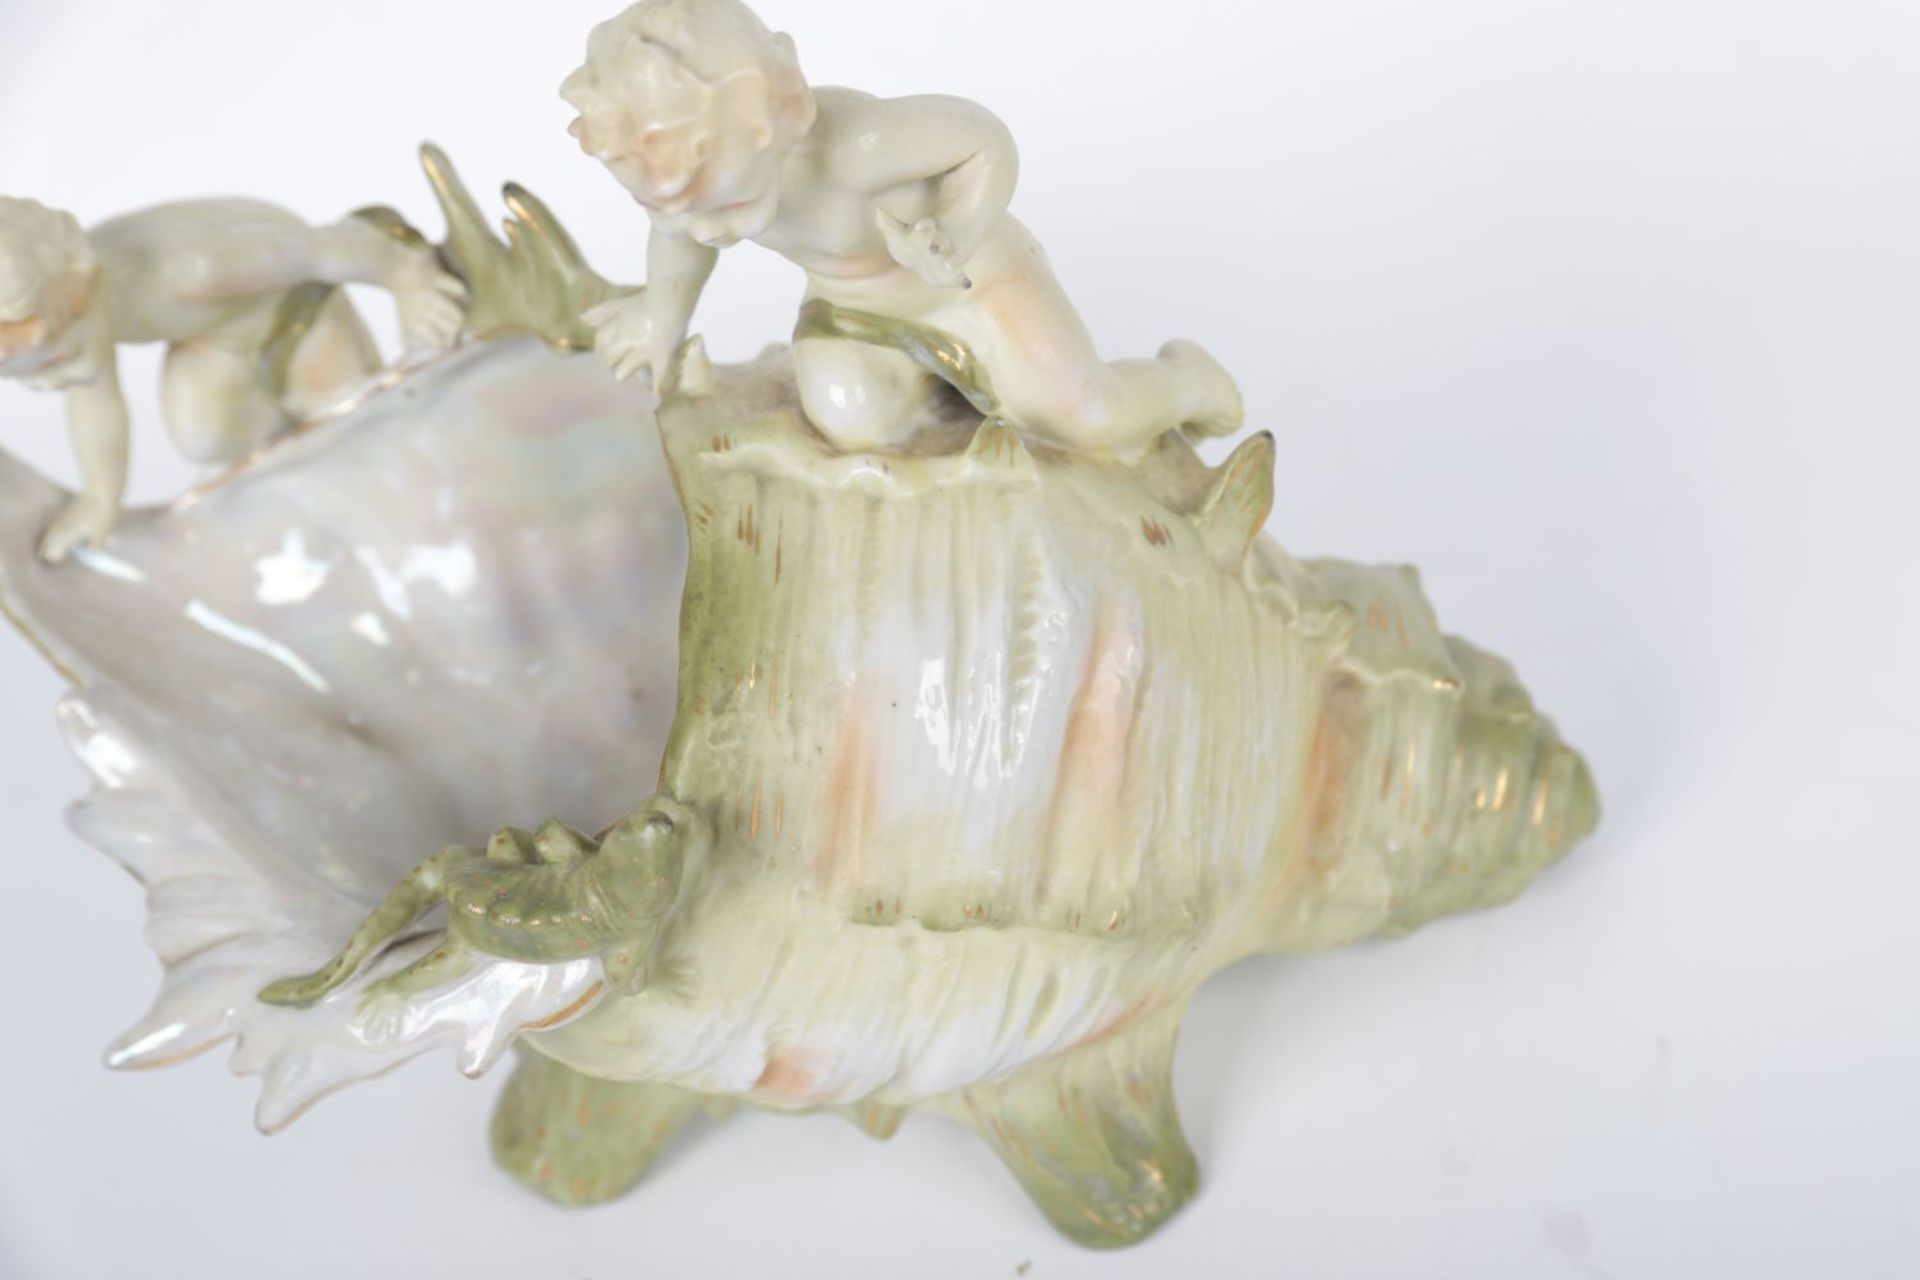 19TH-CENTURY CONCH SHELL - Image 2 of 4